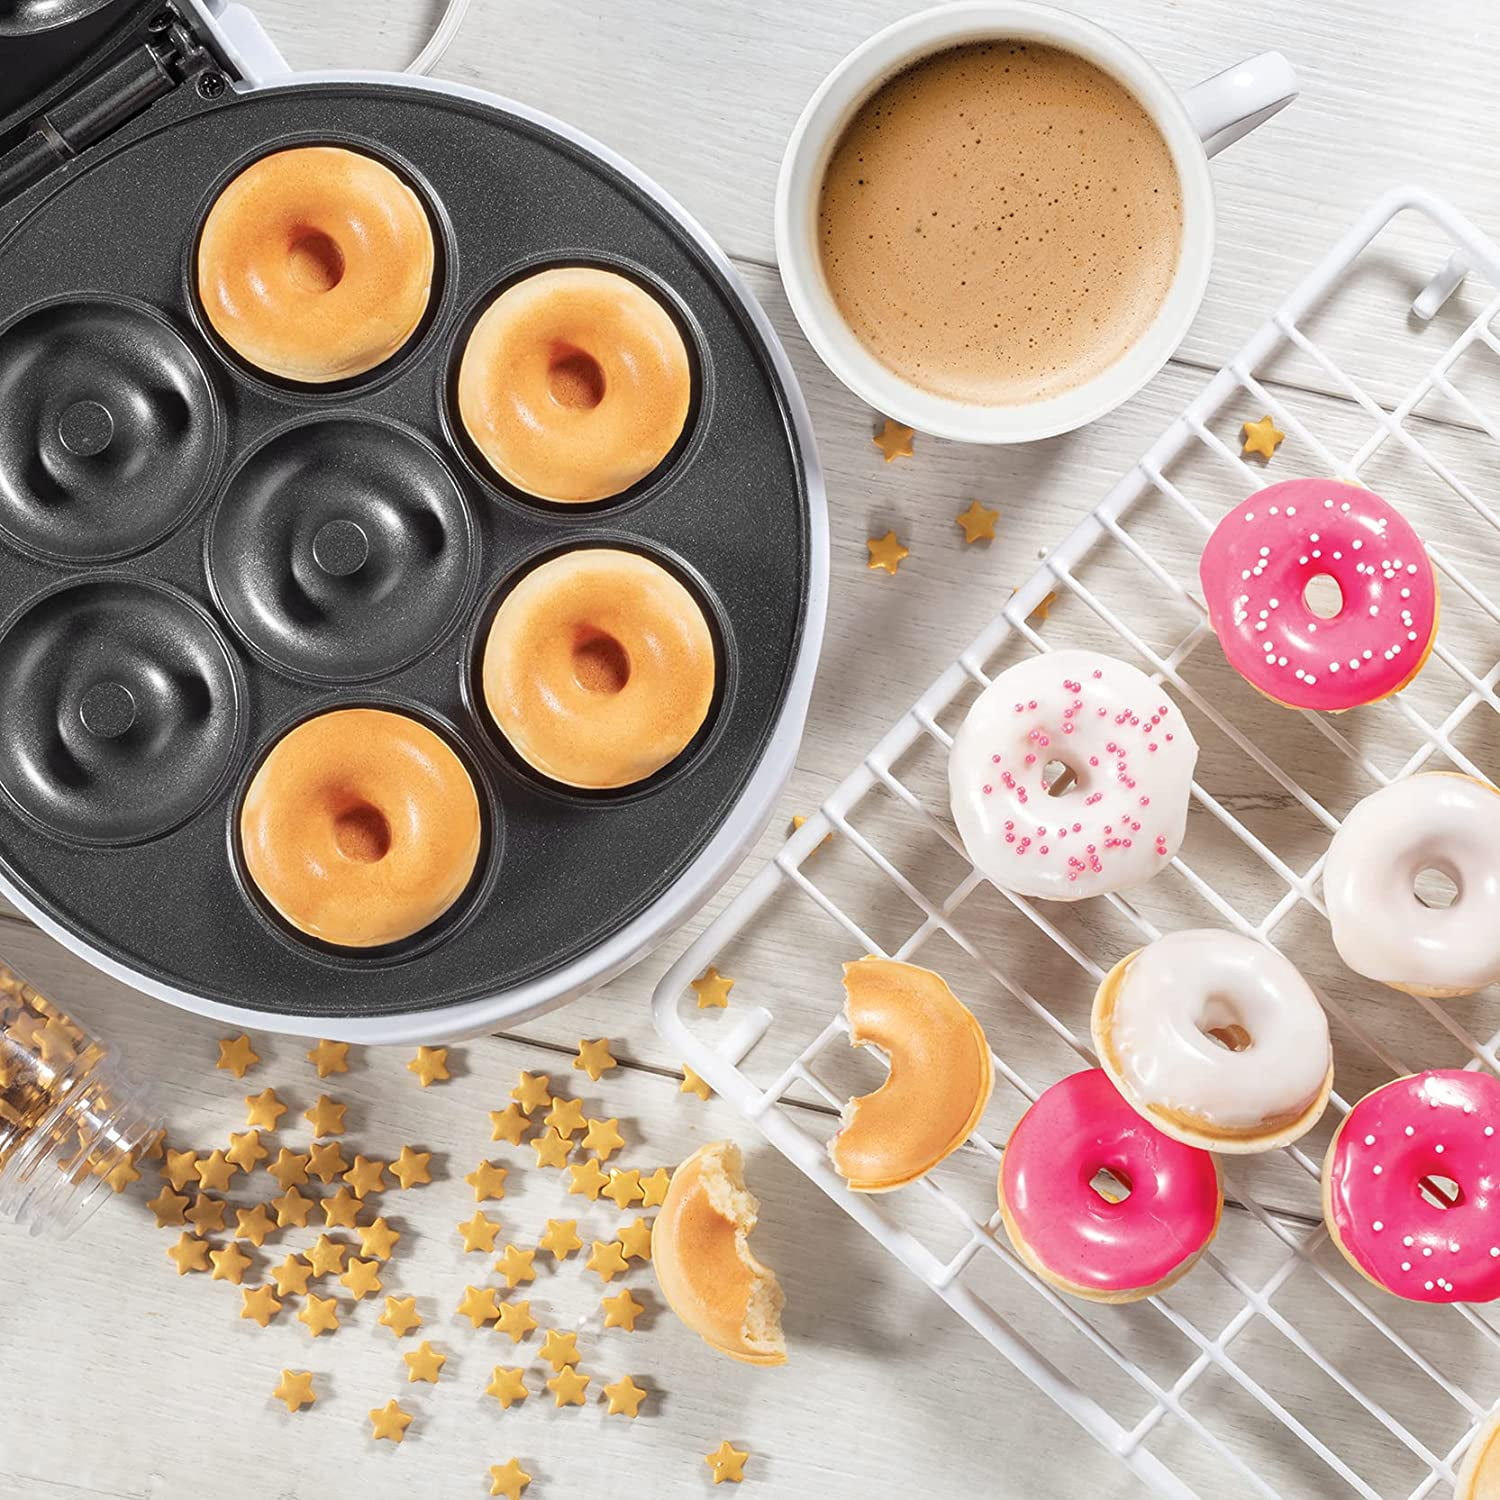 Mini Donut Maker- Electric Non-Stick Surface Makes 7 Small Doughnuts,  Decorate, Frost or Ice Your Own for Kid Friendly Treat- Unique Baking  Activity